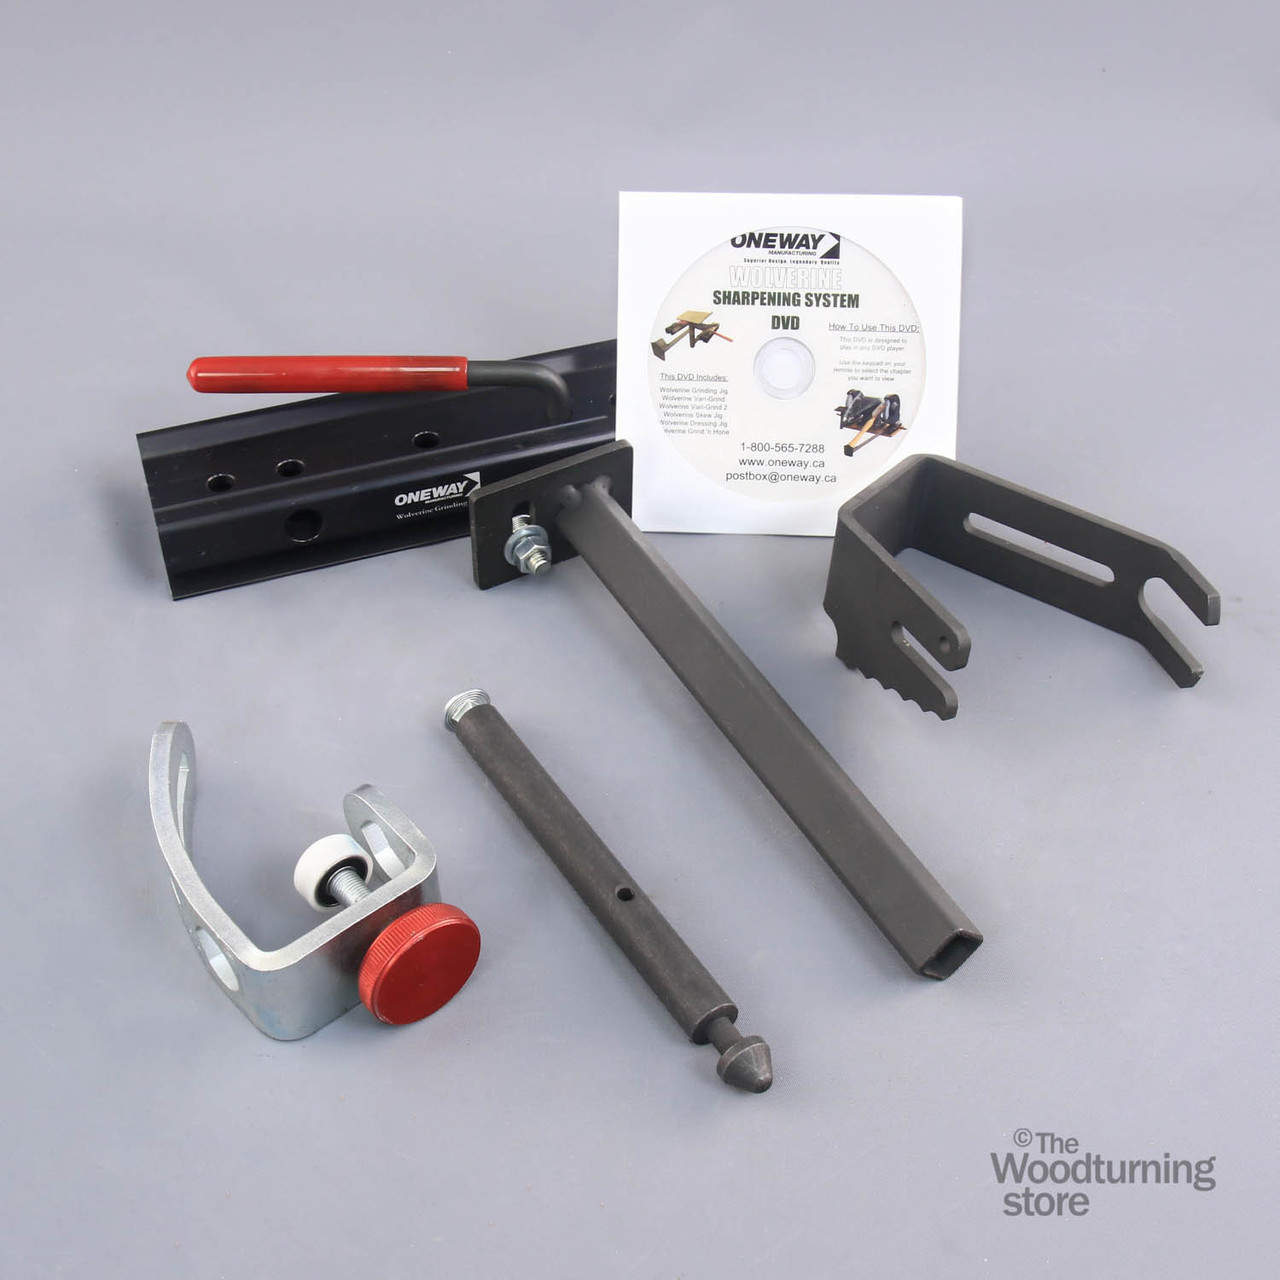 Oneway, Vari-Grind 2 Attachment for the Wolverine Grinding Jig, with base